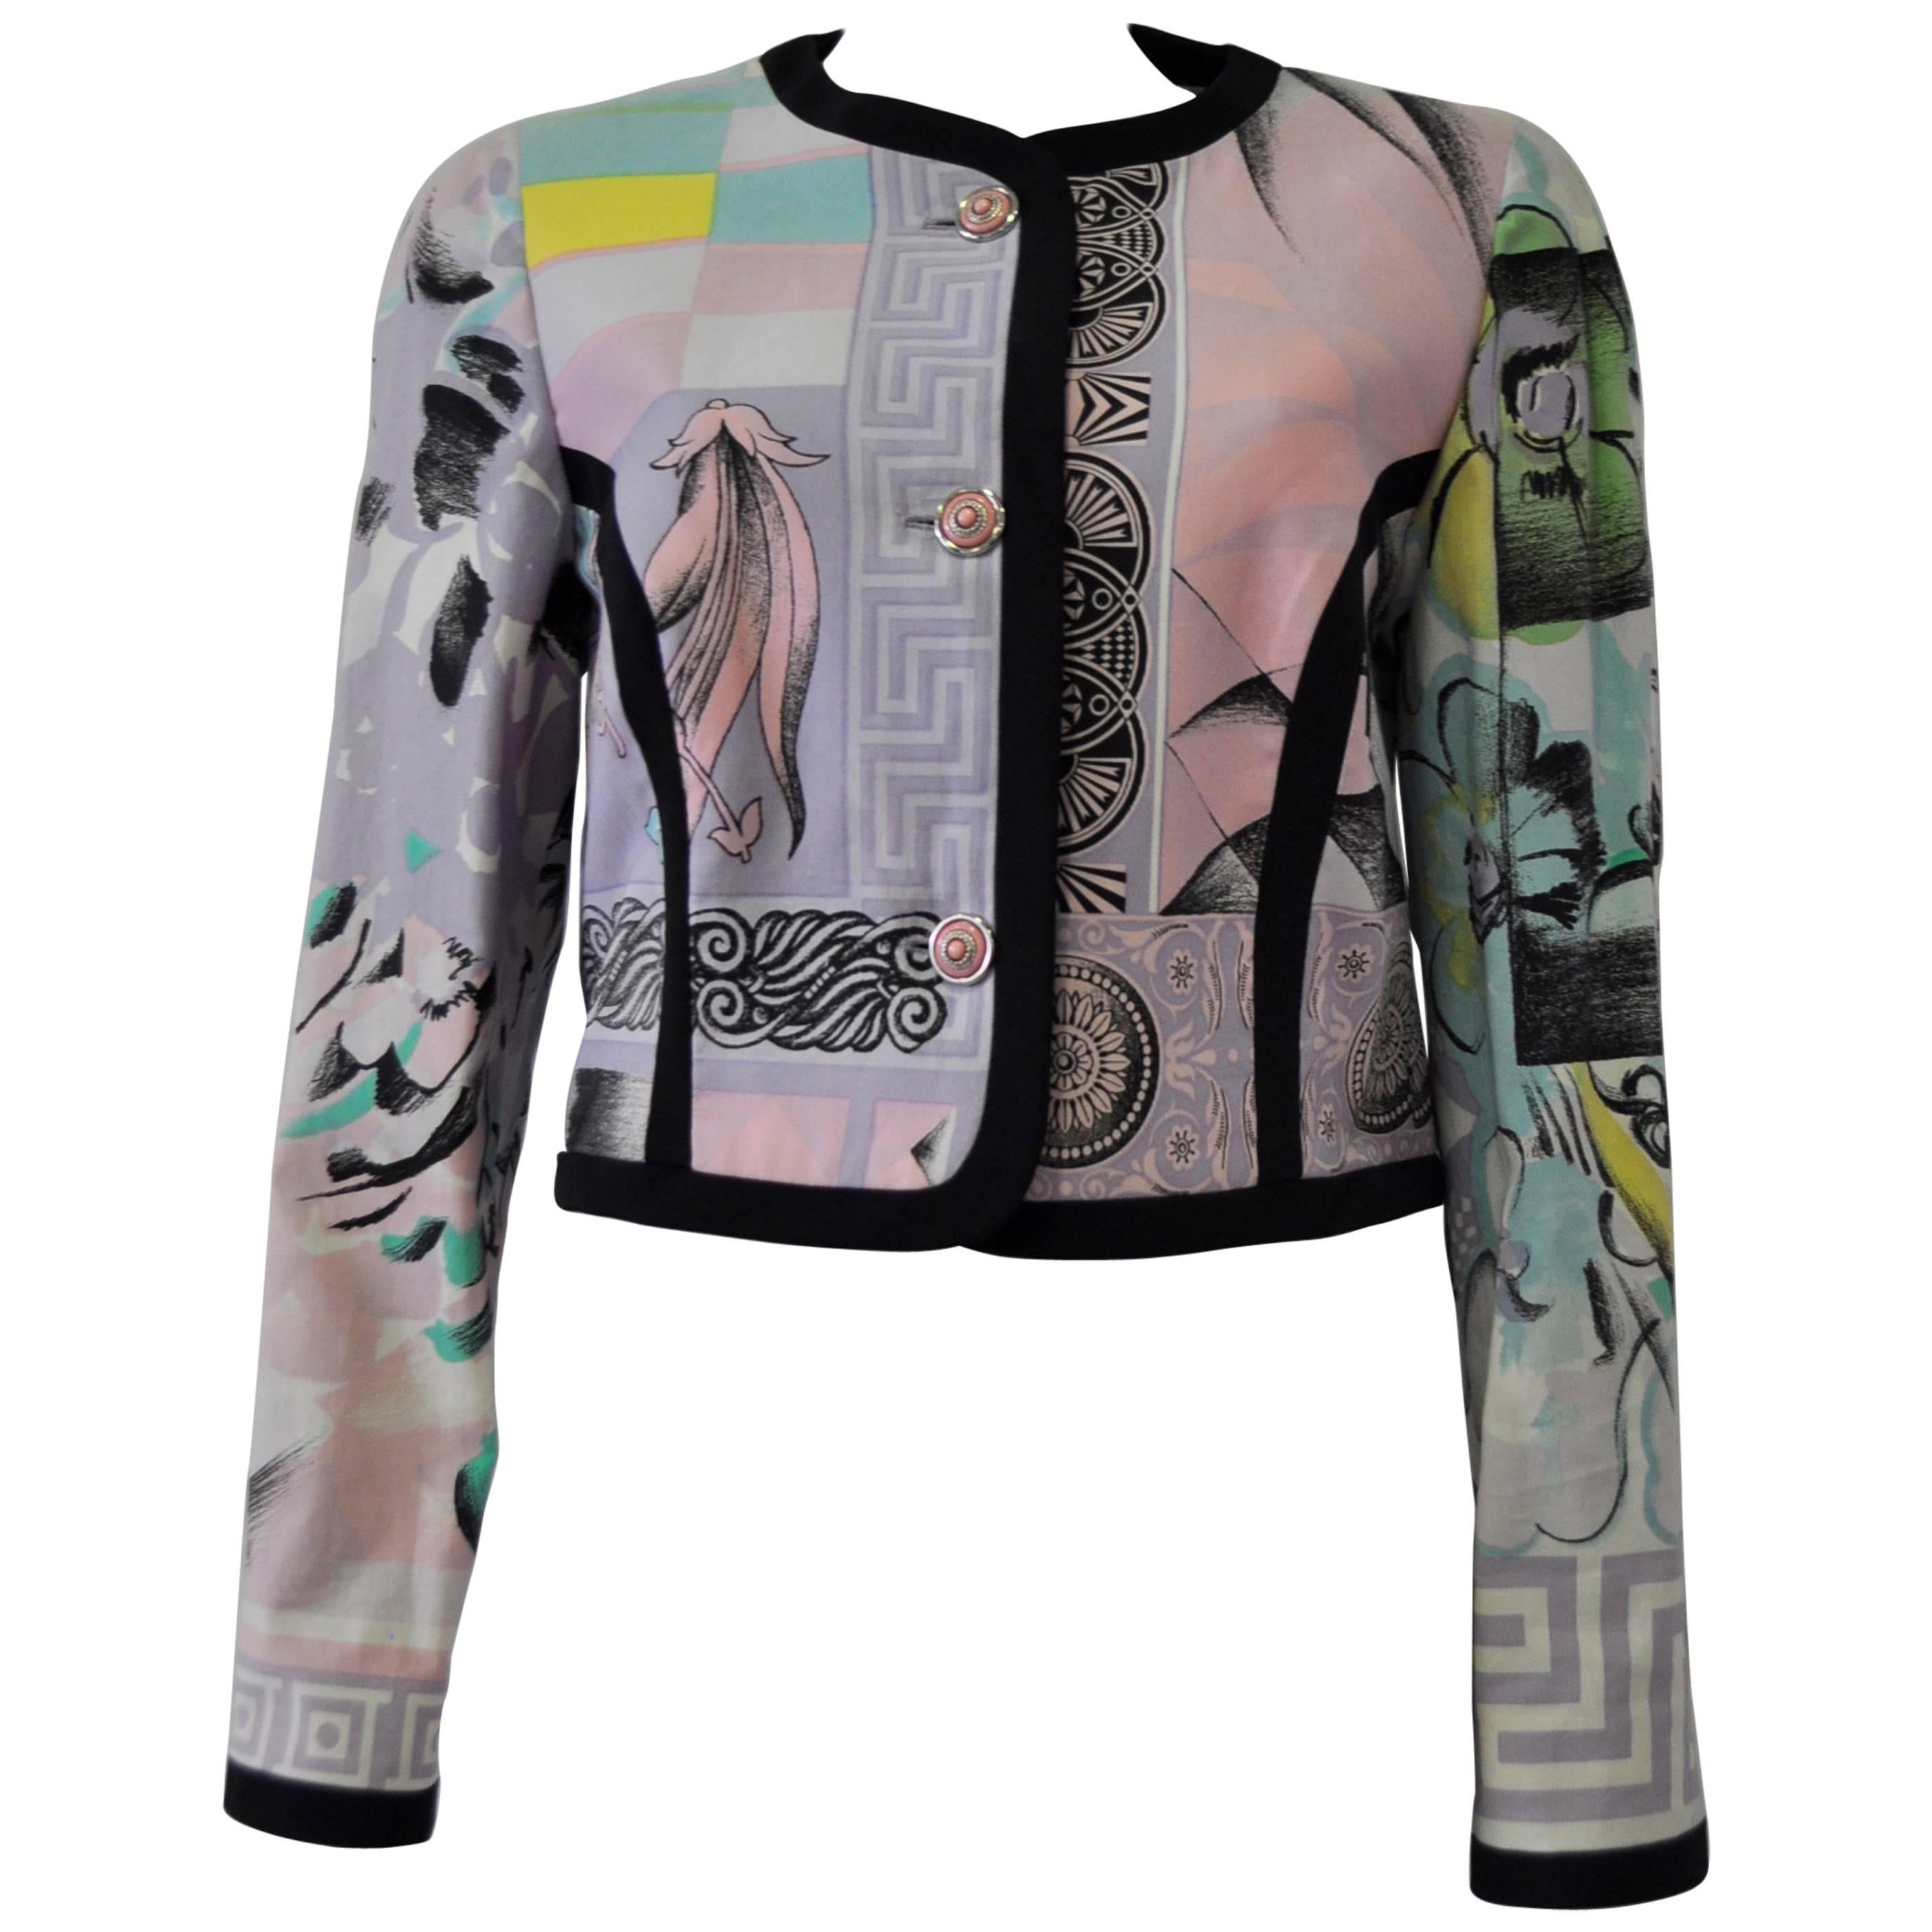 Iconic Gianni Versace Istante Pastel Meandros "Greek Key" Printed Jacket For Sale